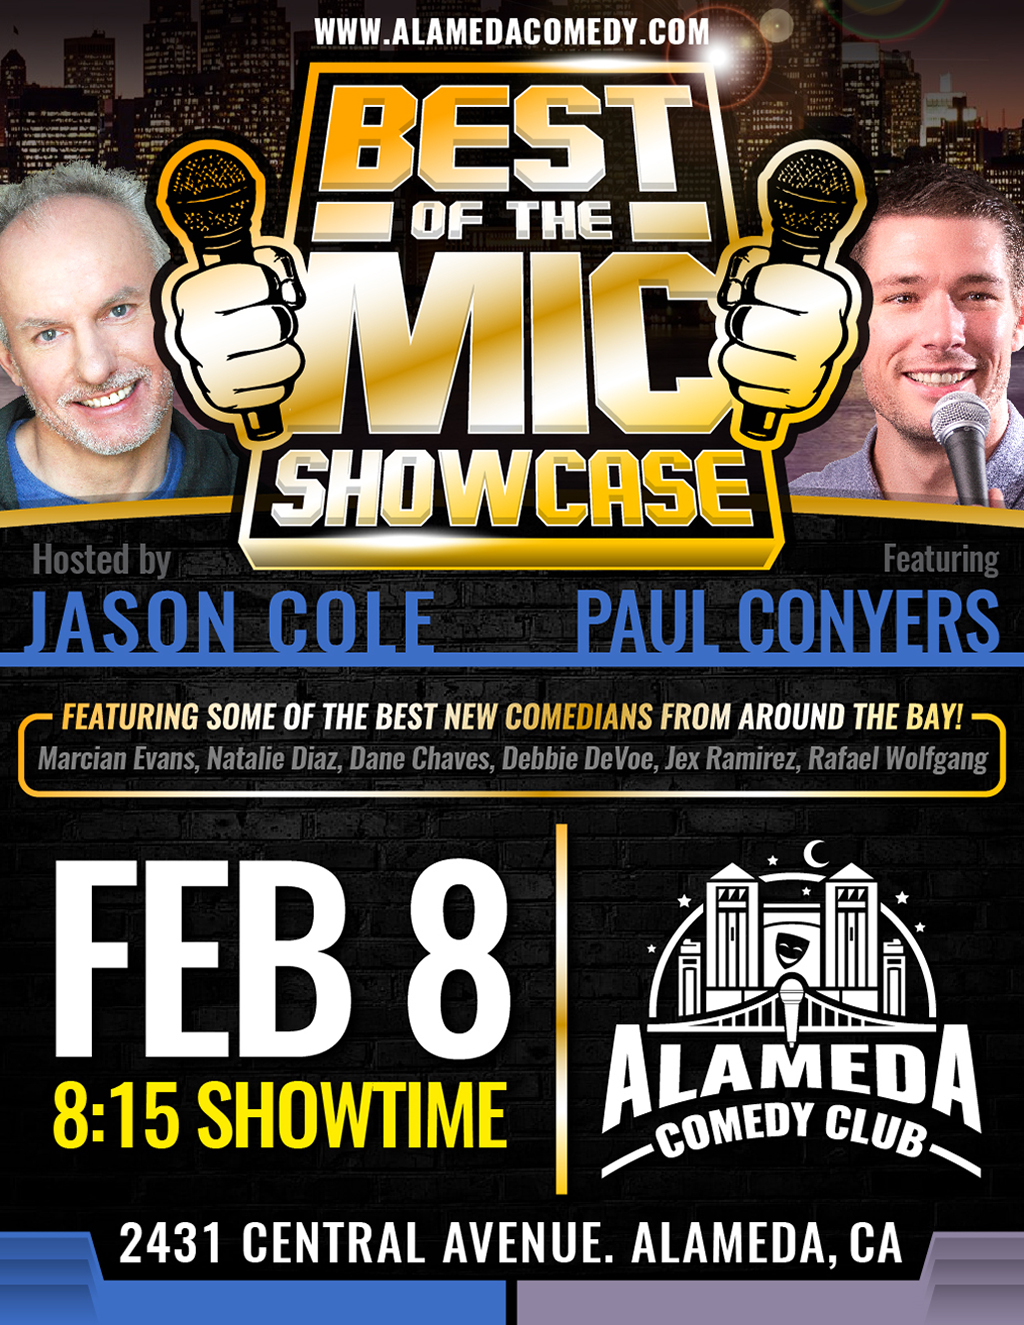 Alameda Comedy Club Join Us for the Best of the Showcase at WWW ALAMEDACOMEDY COM promotion flier on Digifli com